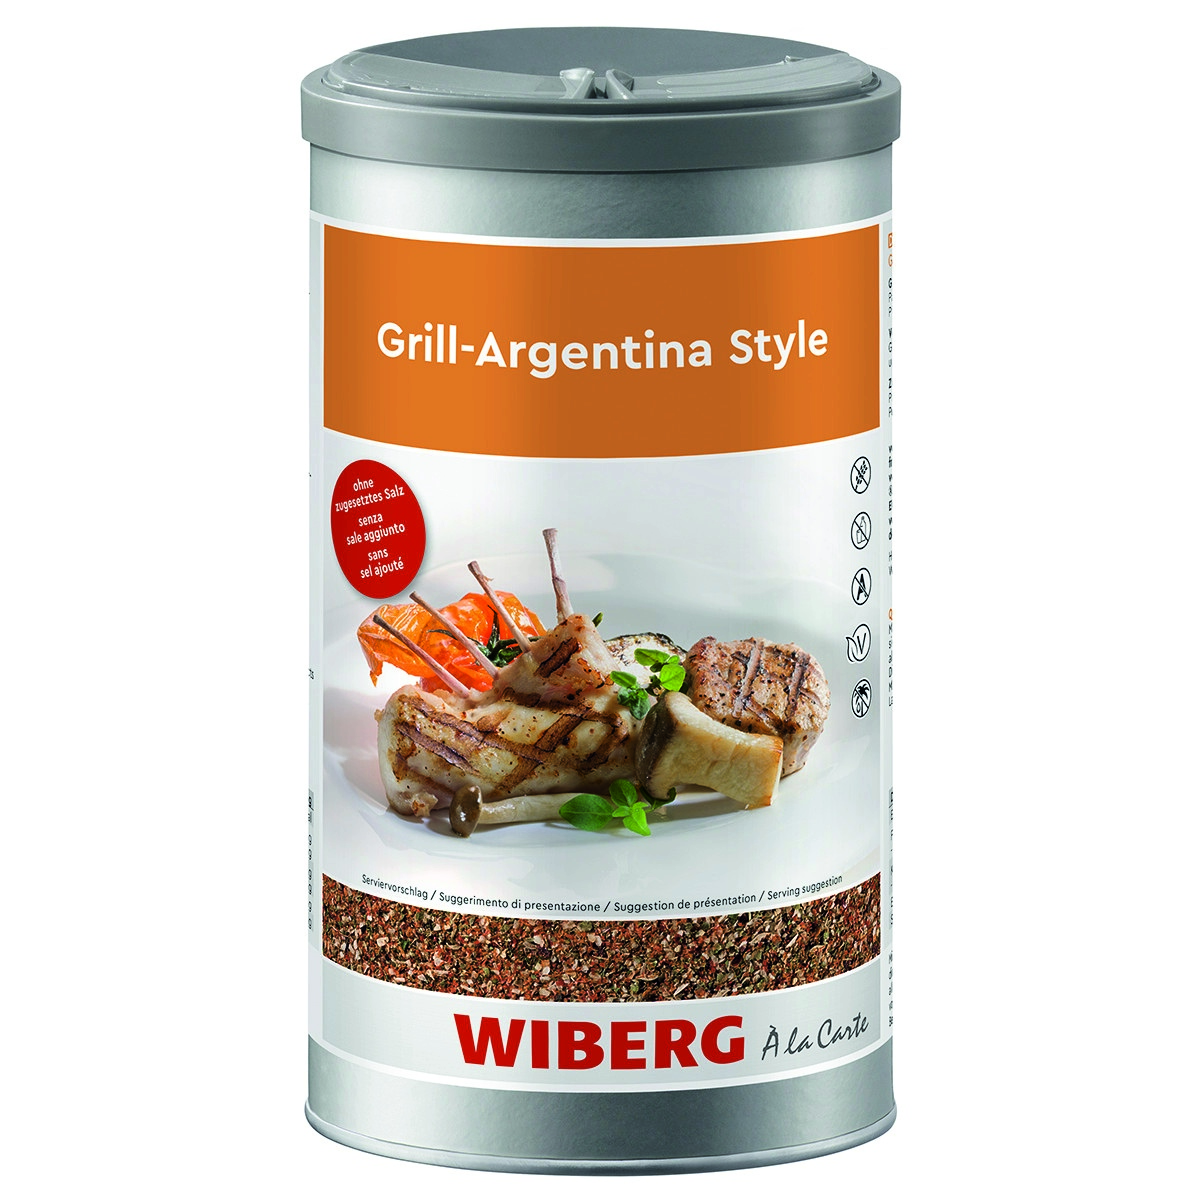 WIBERG Grill-Argentina Style